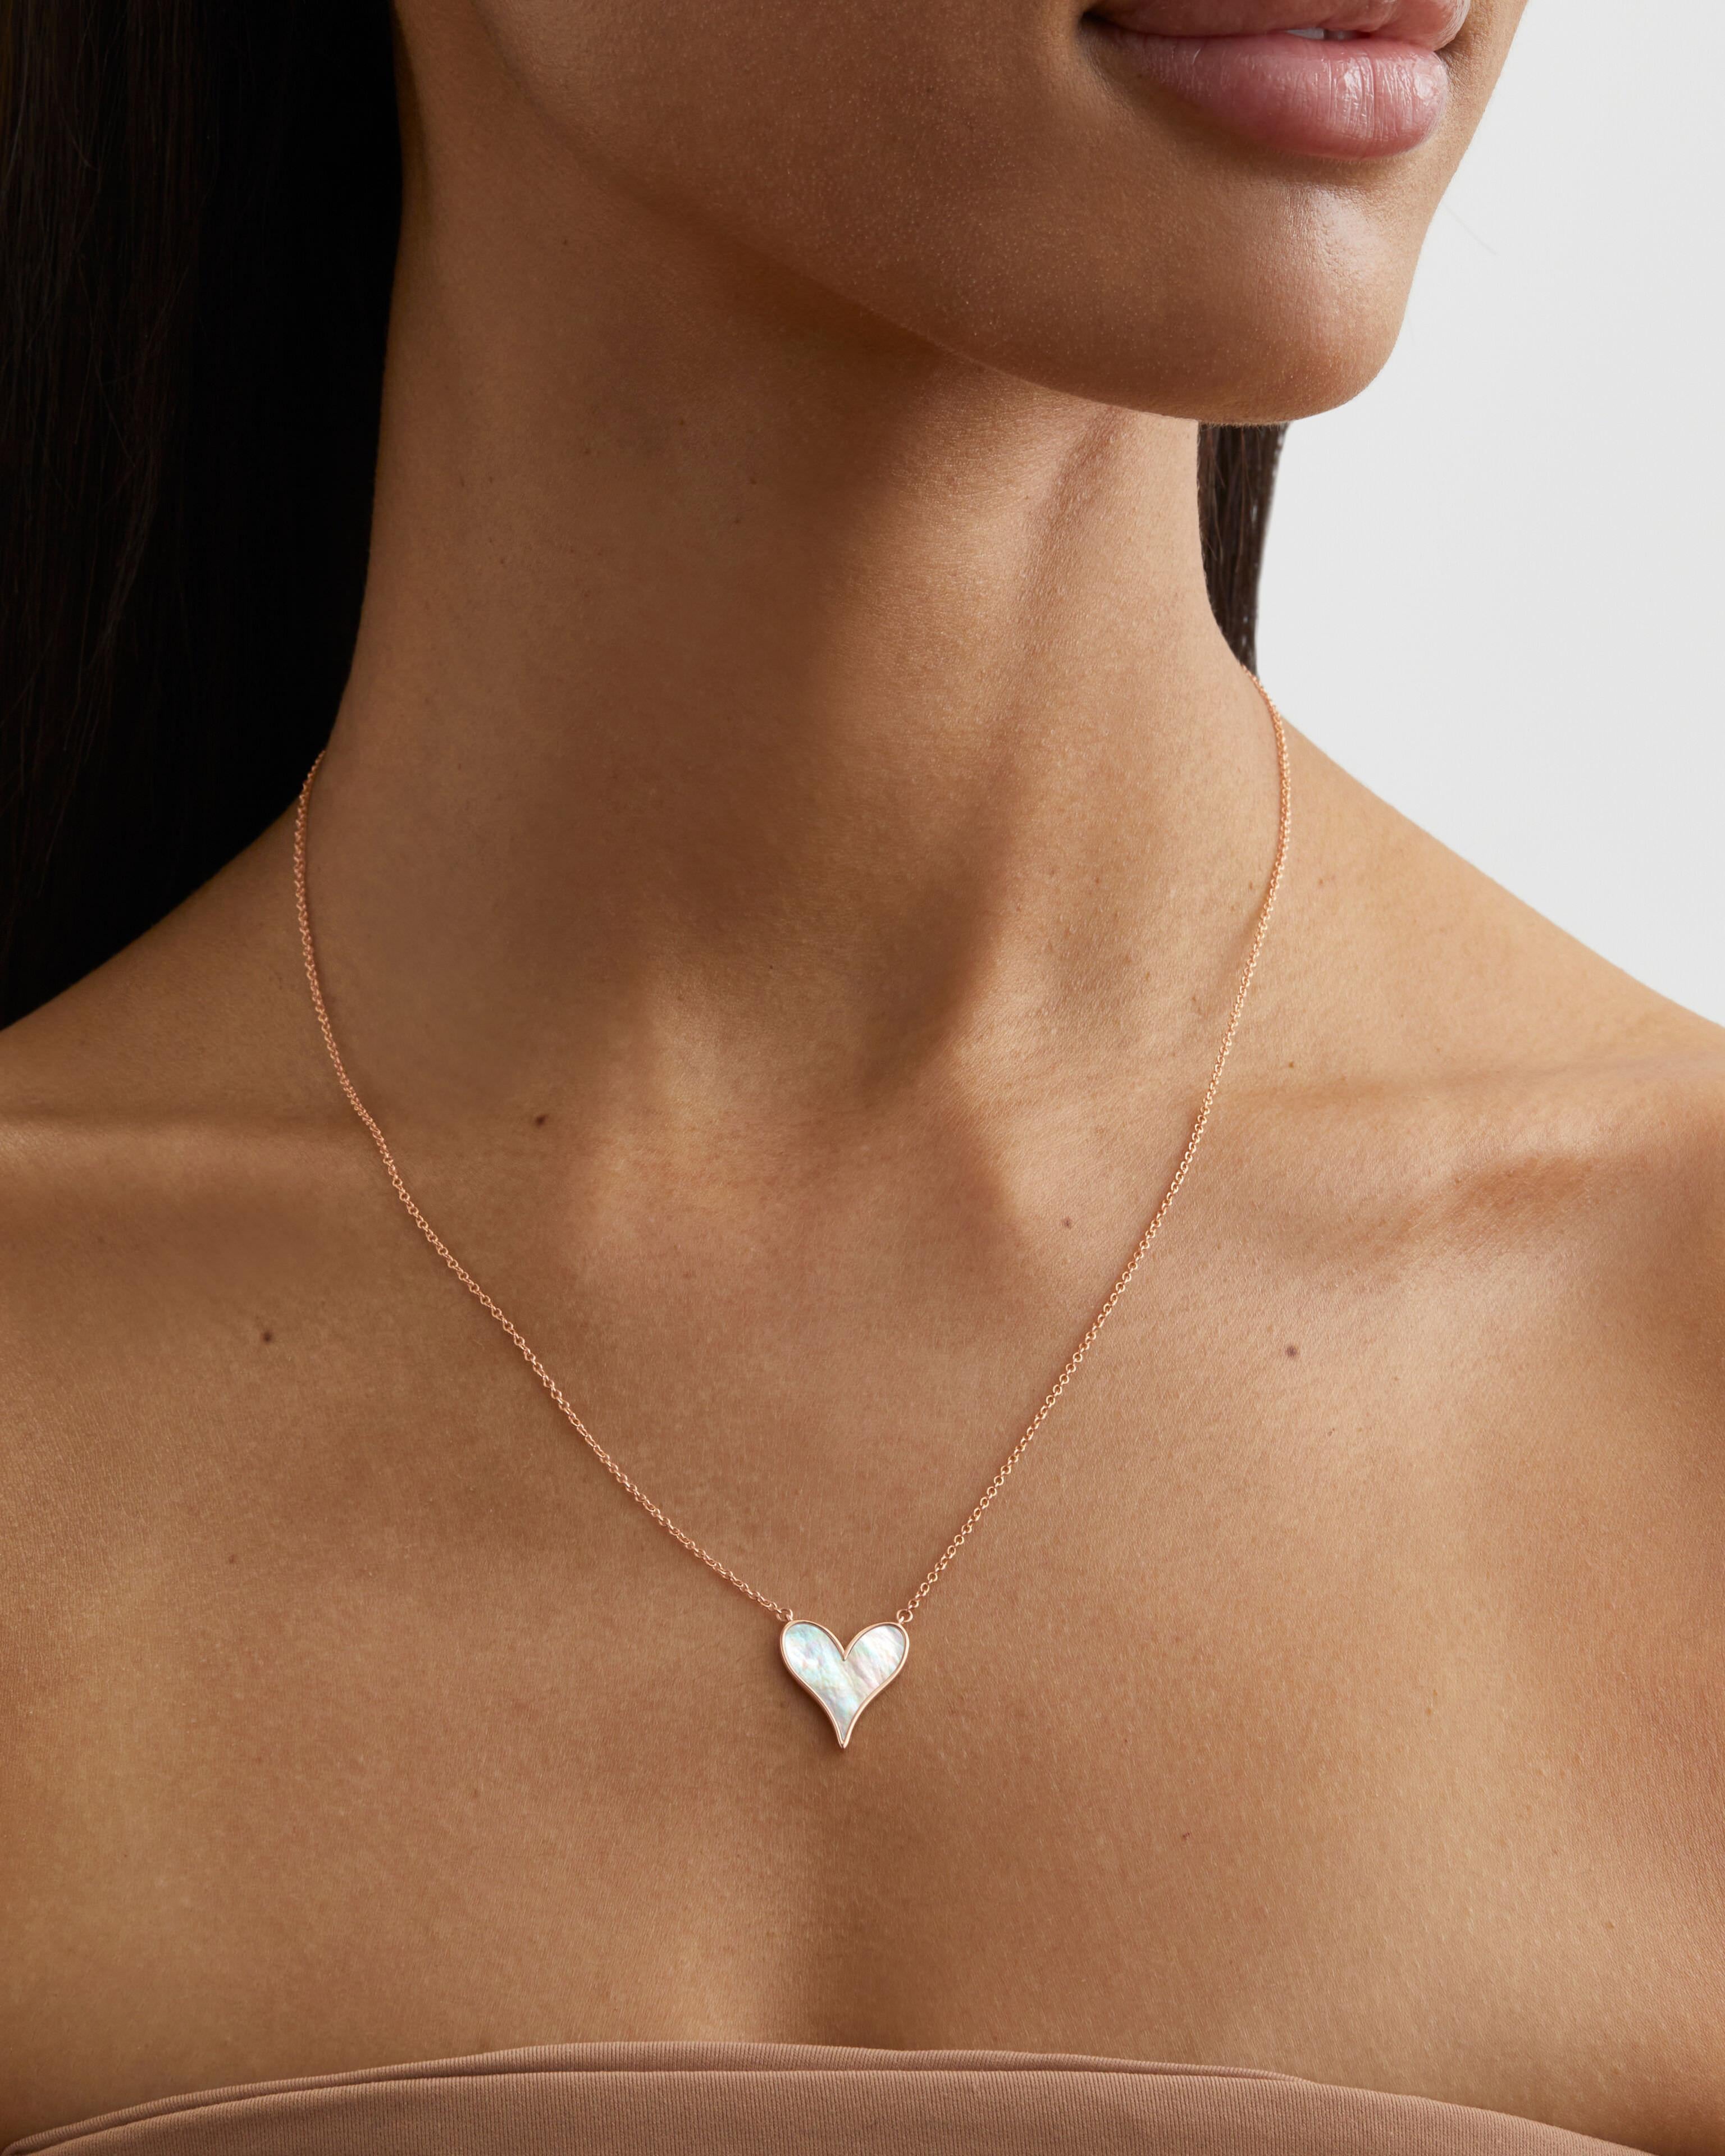 Roseate Jewelry Heart Pendant 15mm in 18k Yellow Gold and Mother-of-Pearl In New Condition For Sale In New York, NY